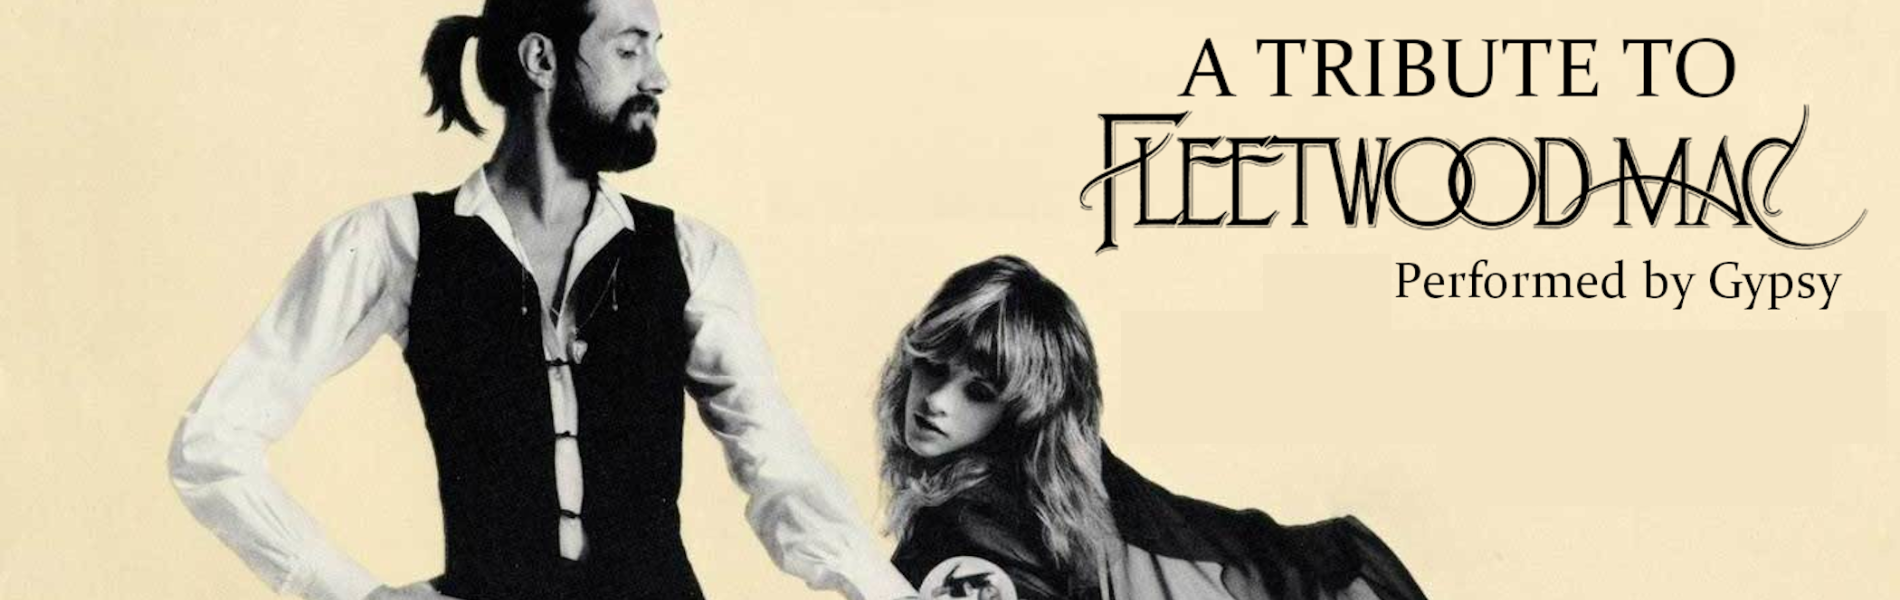 The image from the album Rumours with the words A Tribute to Fleetwood Mac performed by Gypsy.